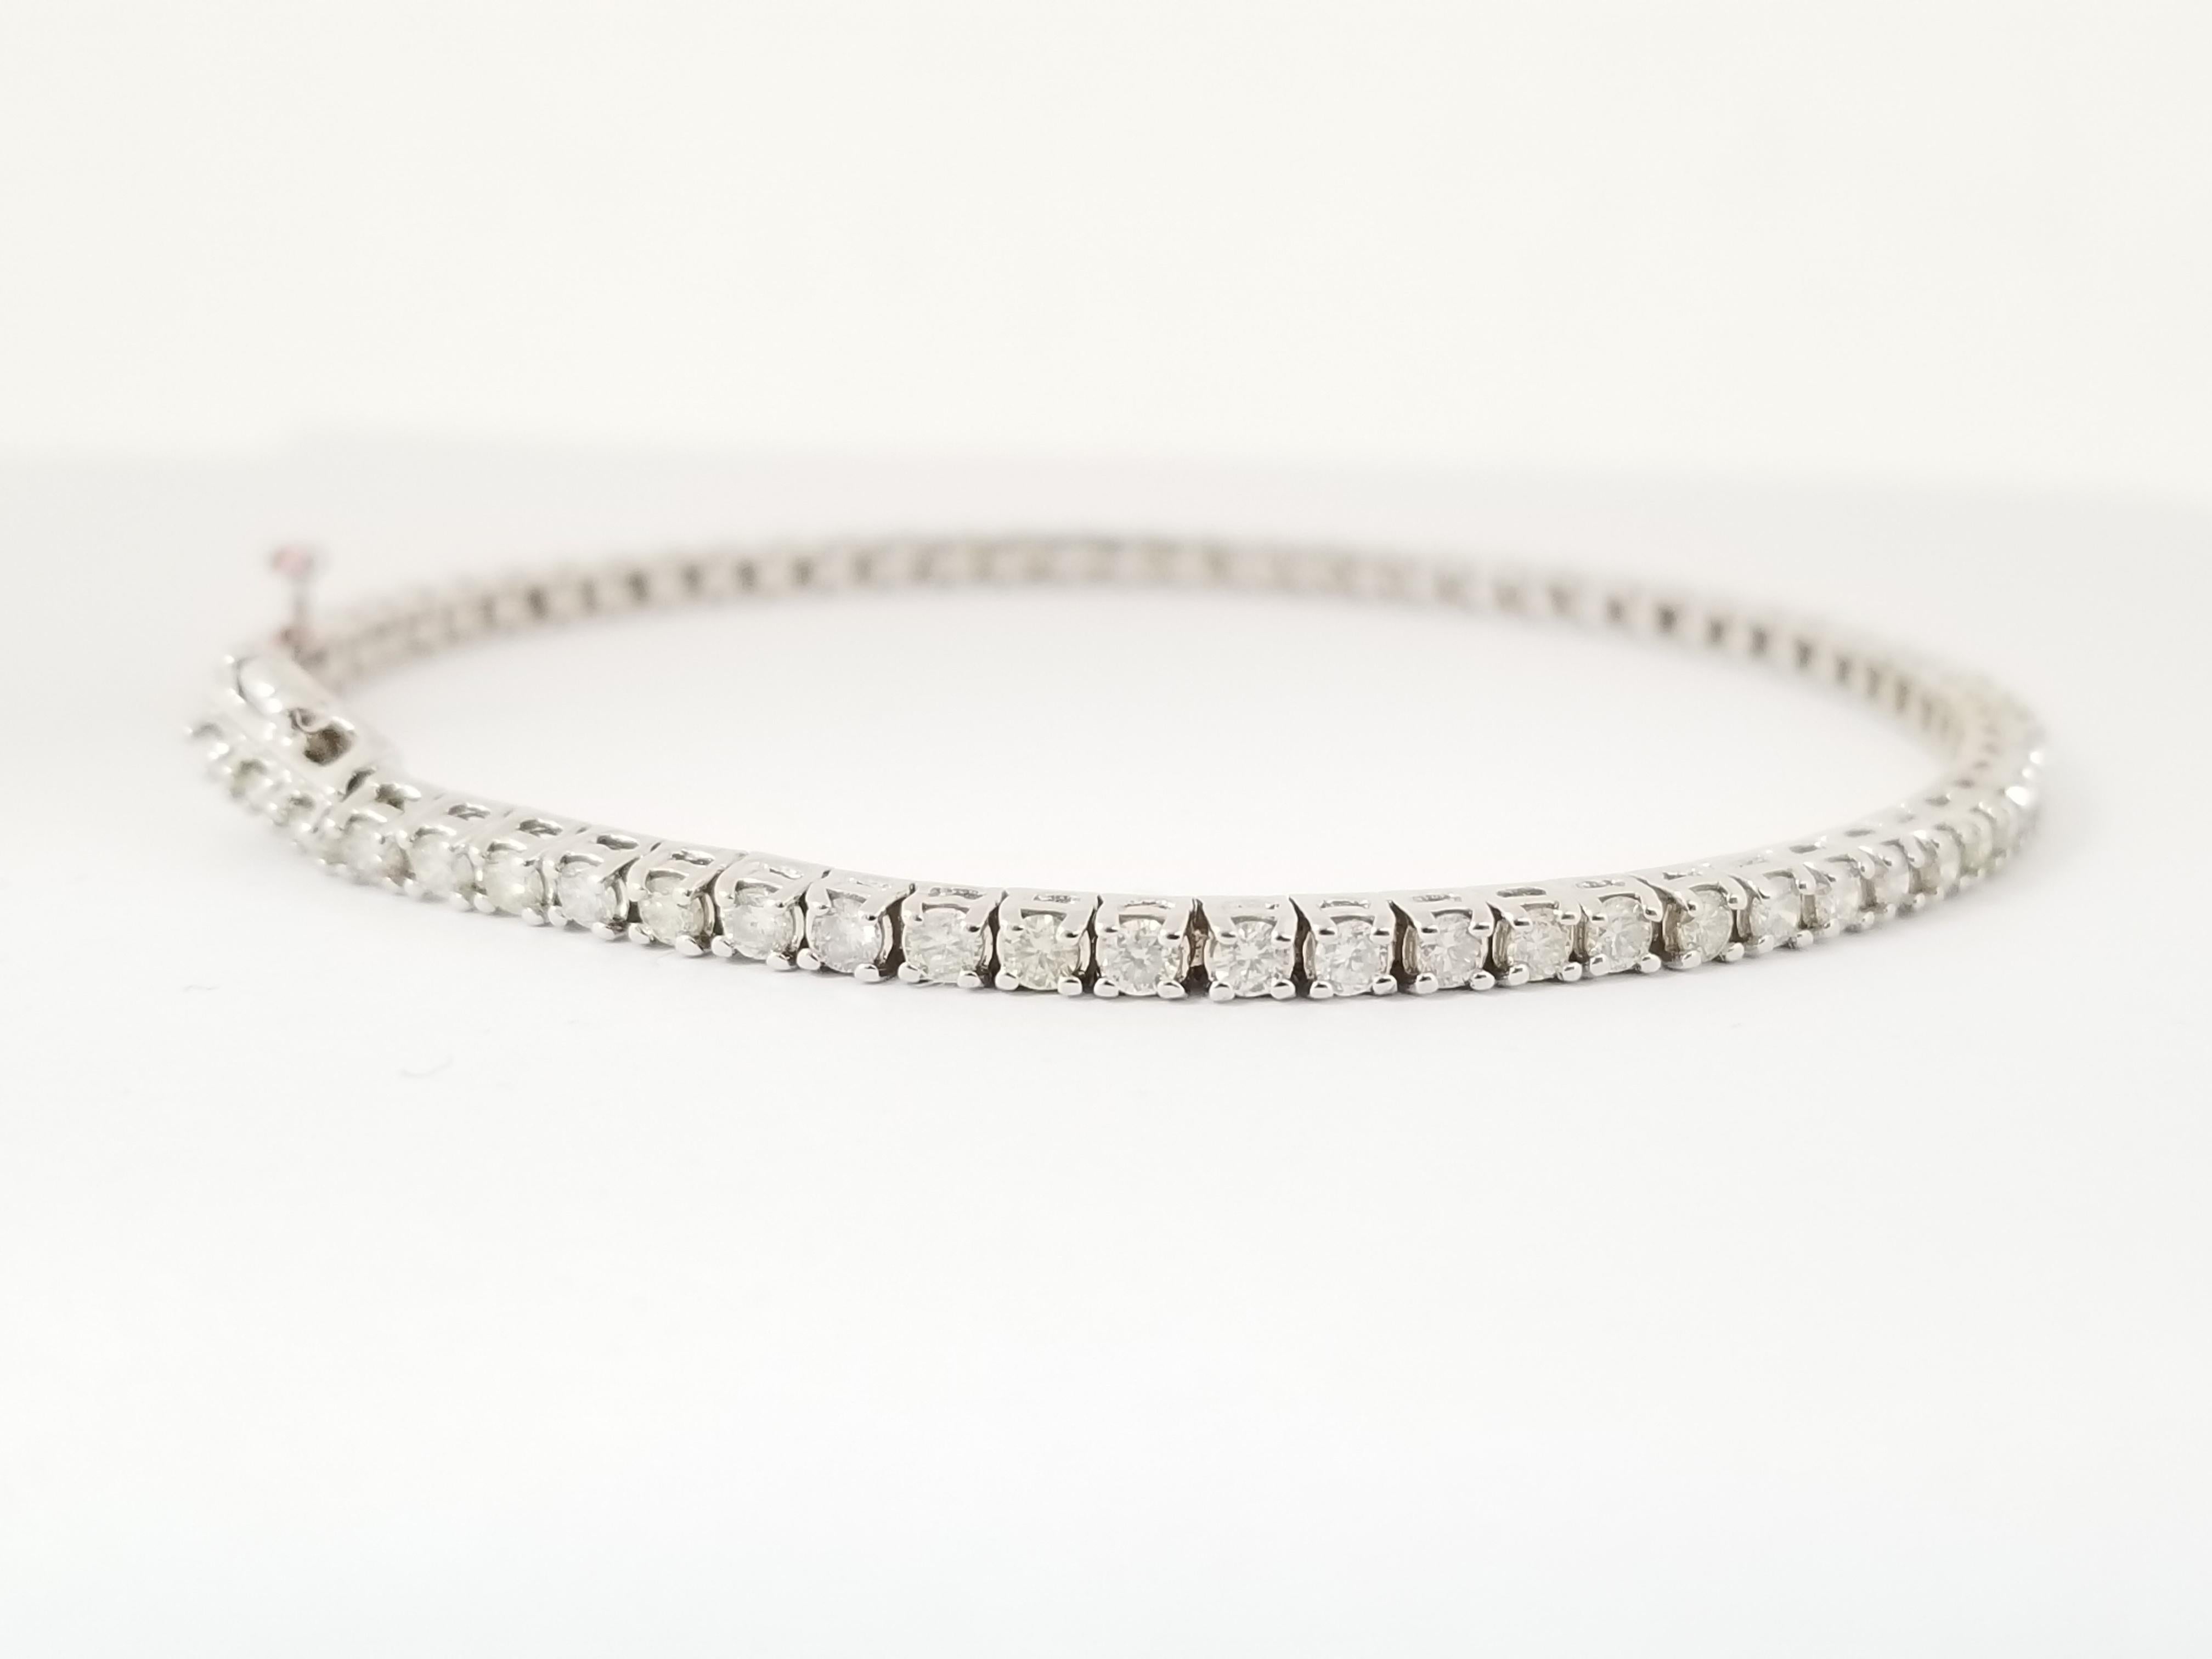 Exquisite style for everyday wear, Beautiful round-brilliant cut diamonds, set on 14k white gold. each stone is set in a classic four-prong style for maximum light brilliance. 7 inch length. Color I, Clarity VS. 2.5 mm wide. Luxury for every moment.